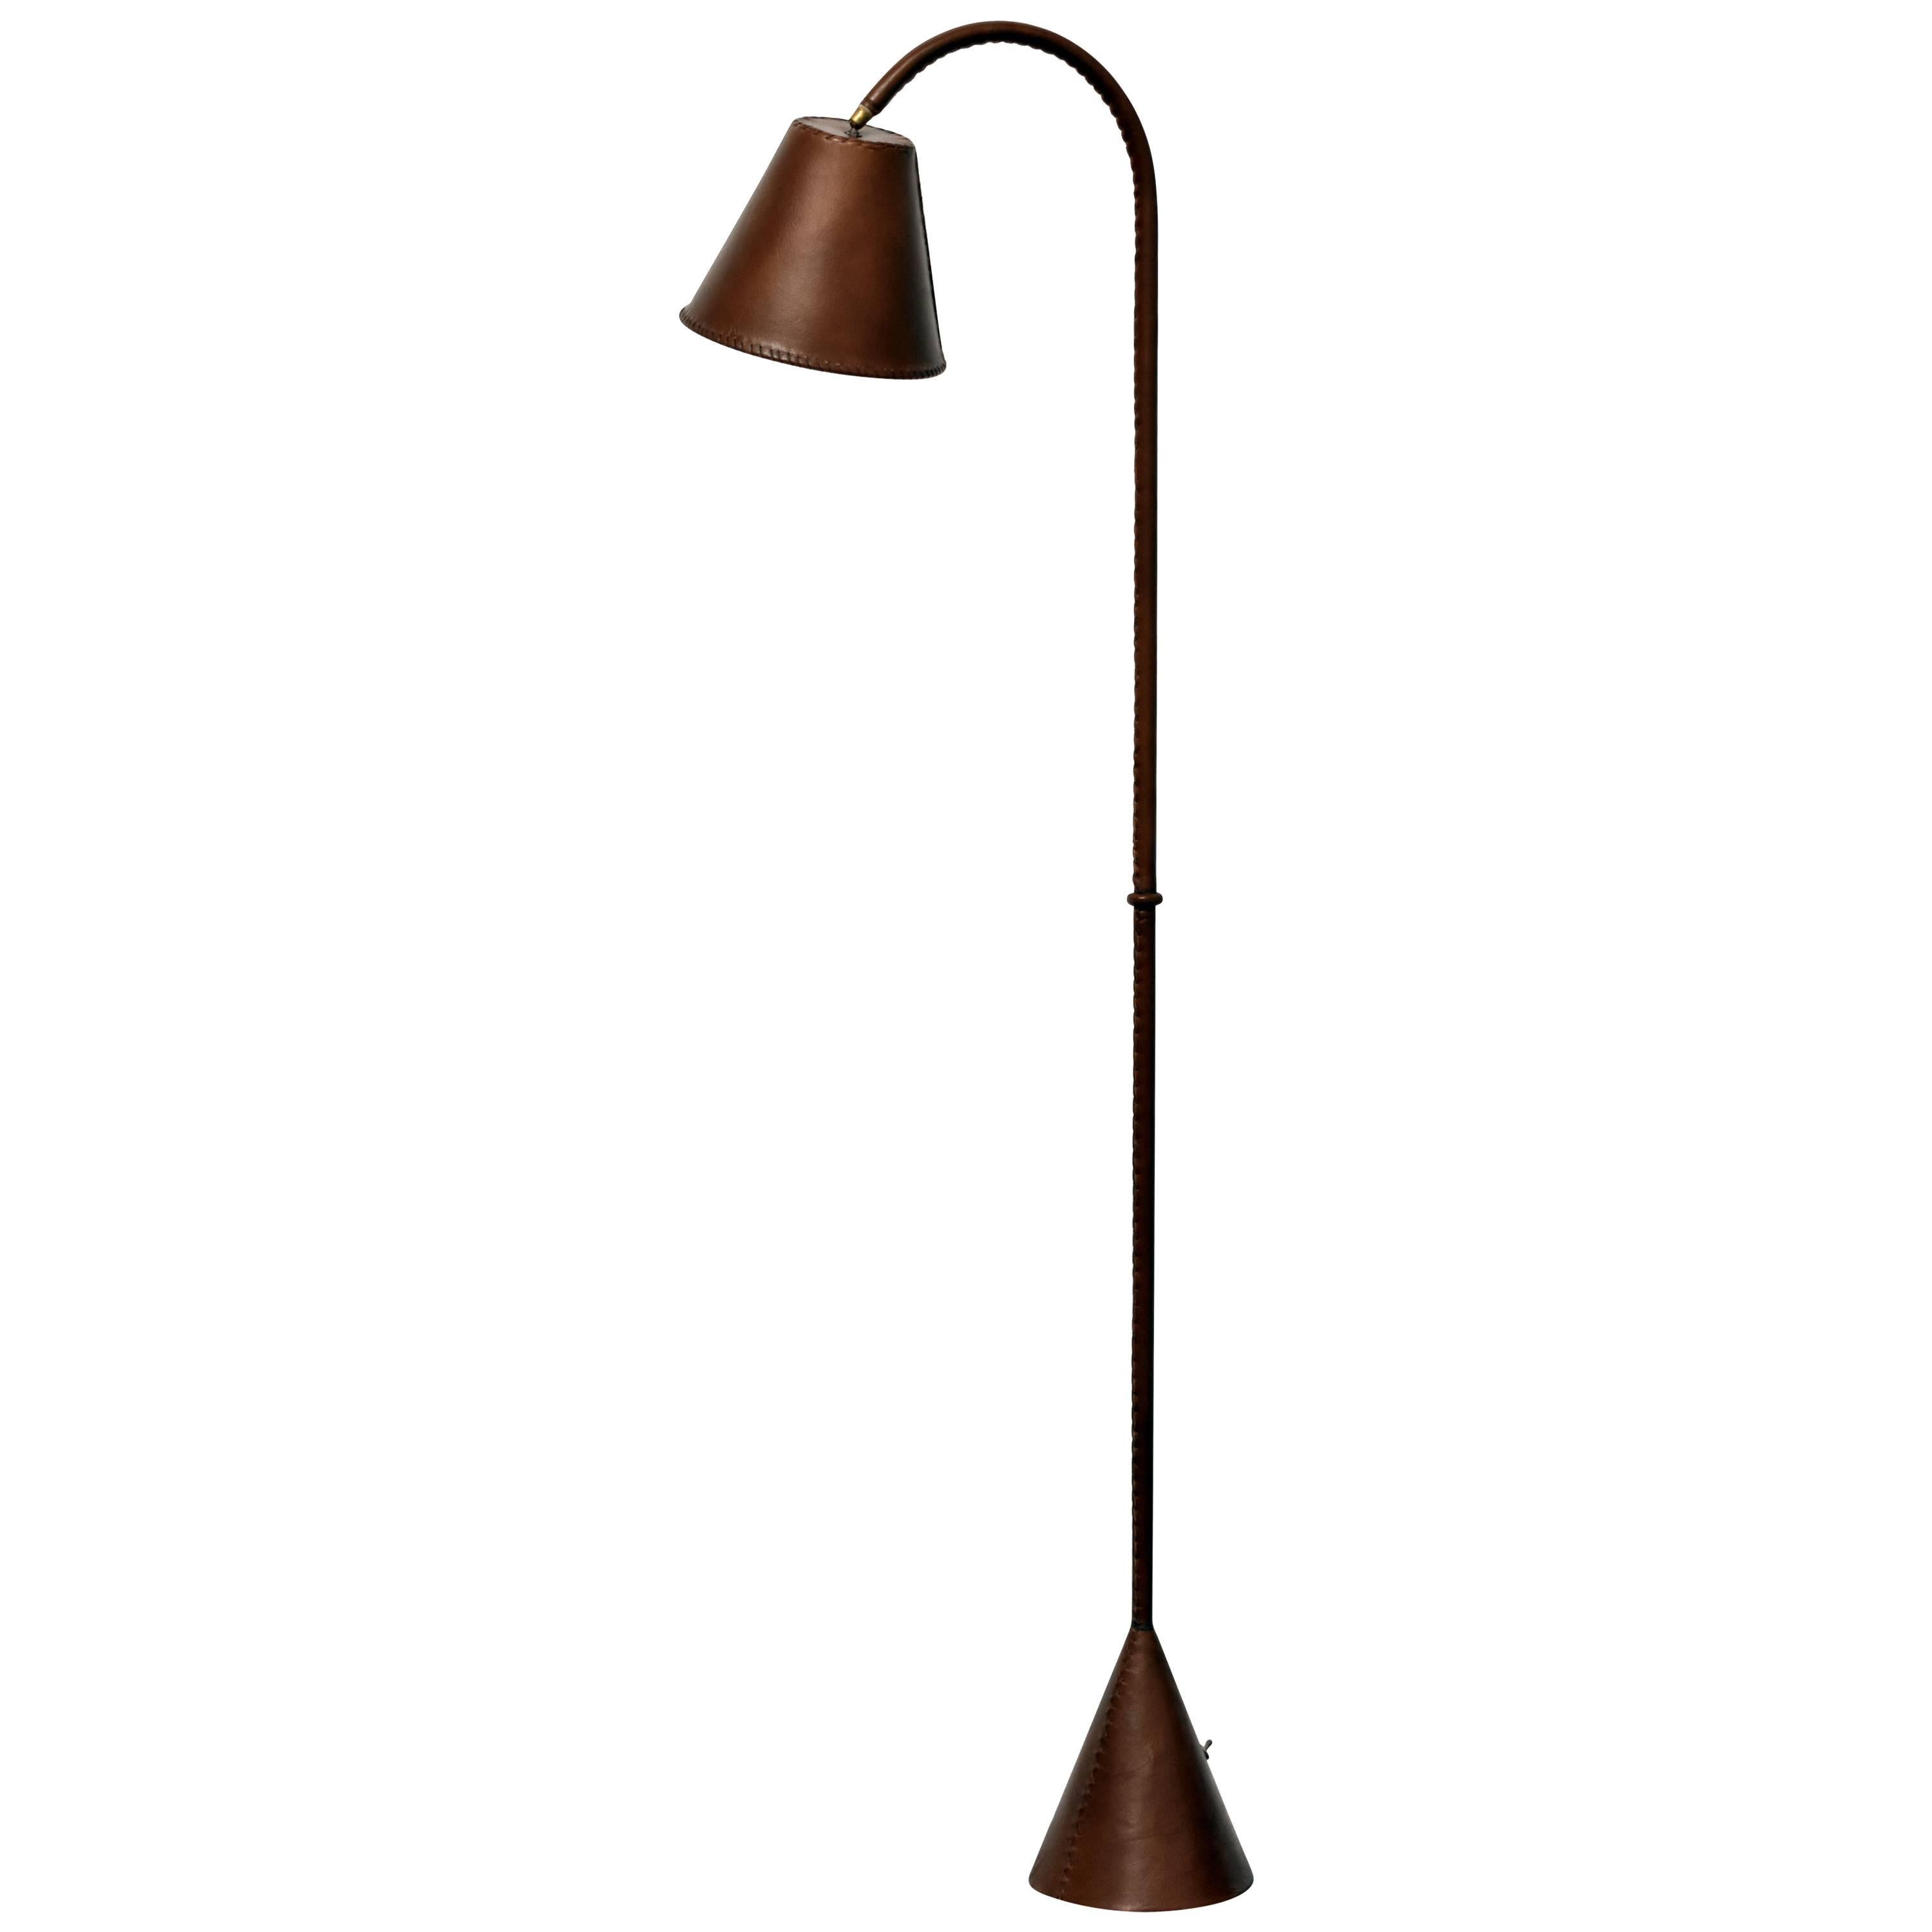 Jacques Adnet Style Floor Lamp in Dark Brown Saddle-Stitched Leather, 1950s